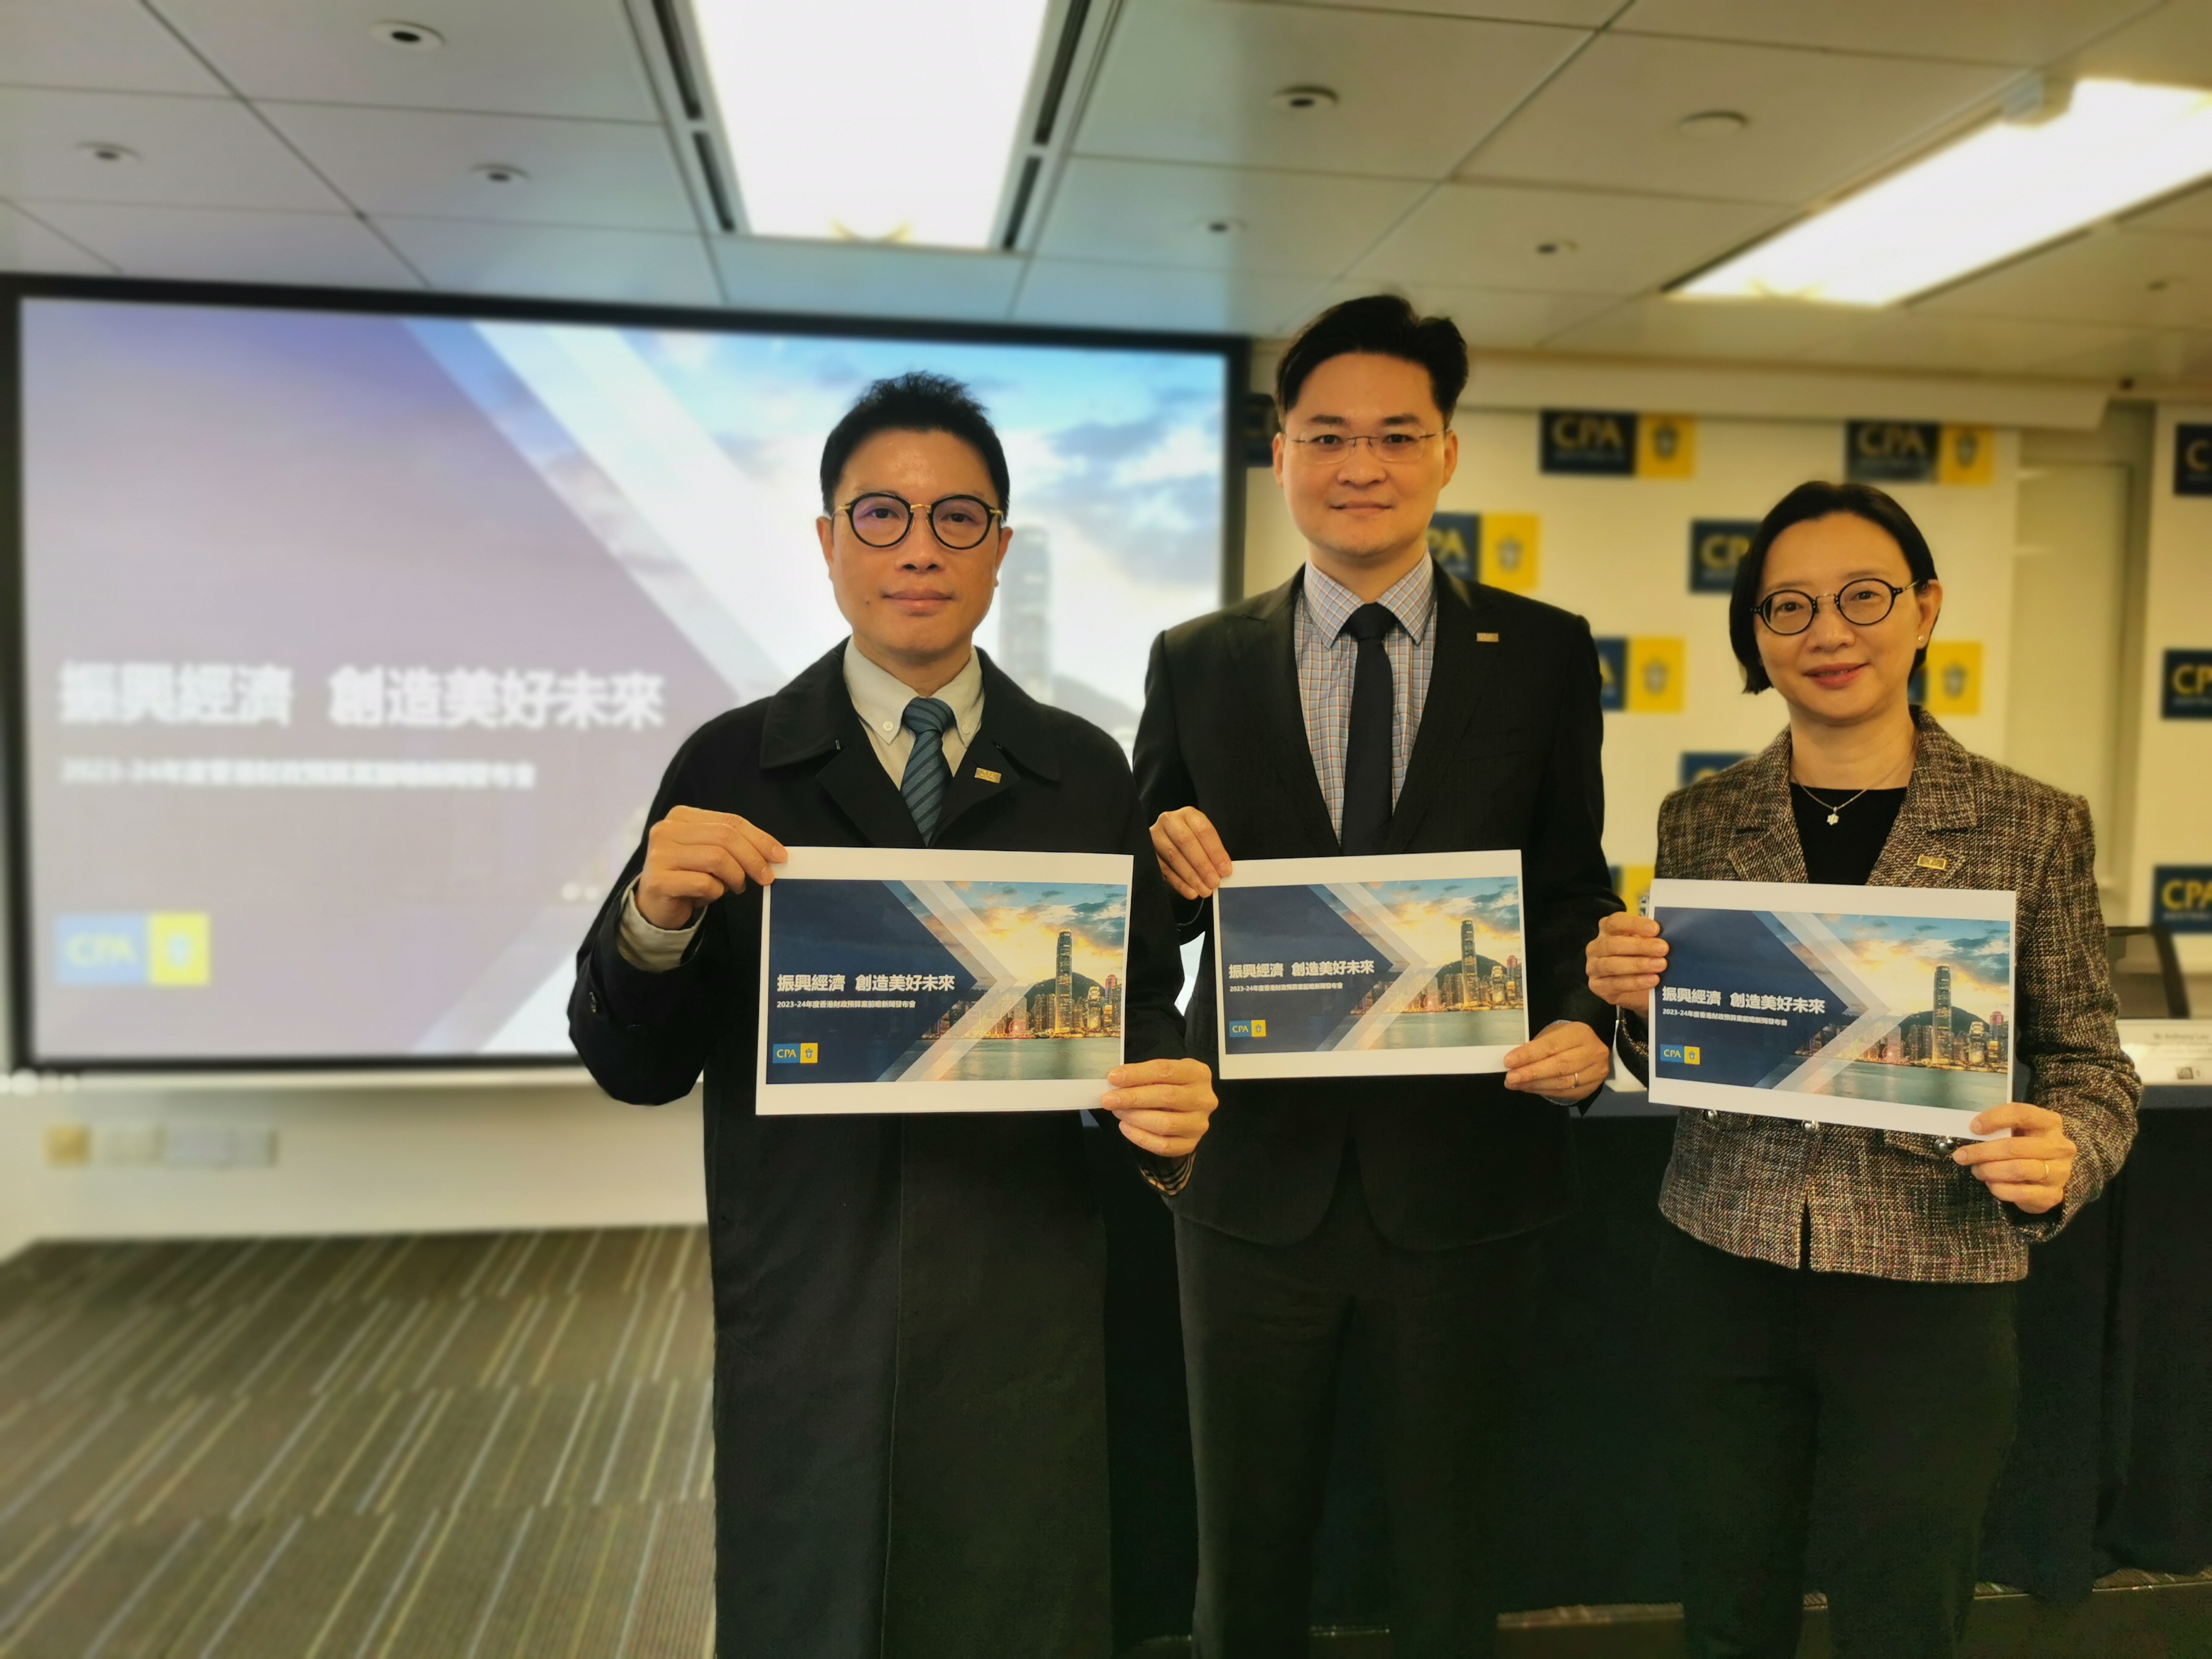 cpa australia hong kong budget bold steps needed for economic boost